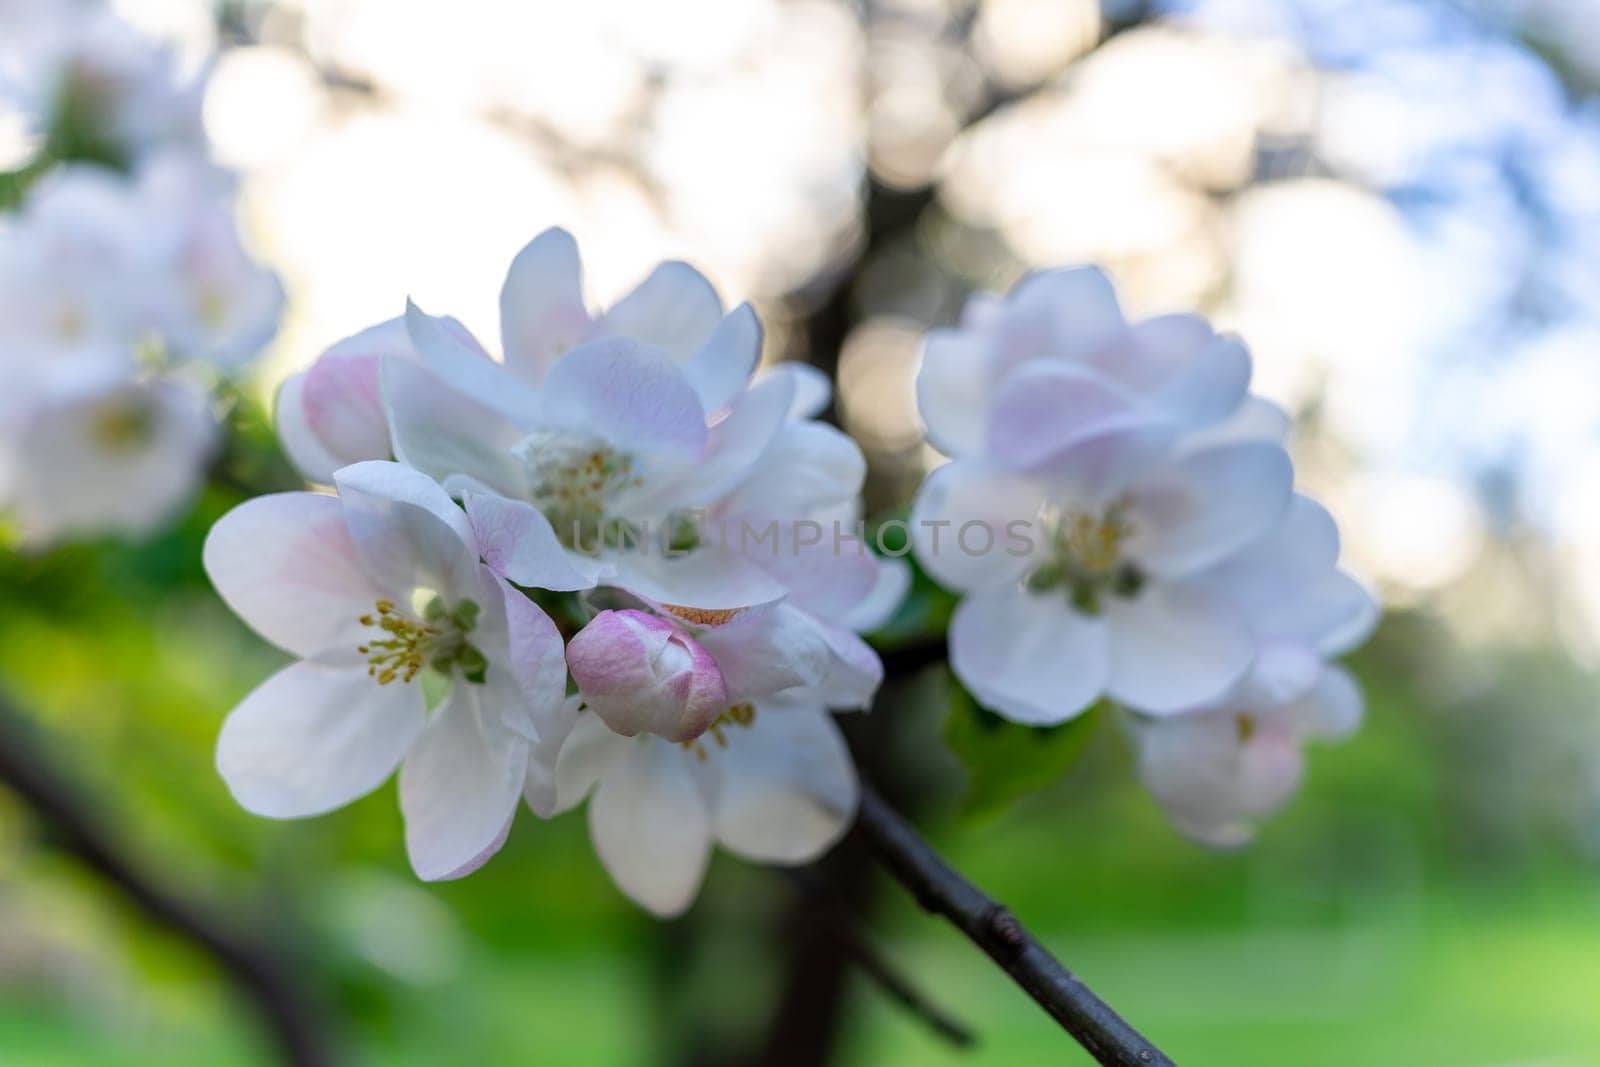 Several flowers of an apple tree on a blurred background of nature. by Serhii_Voroshchuk